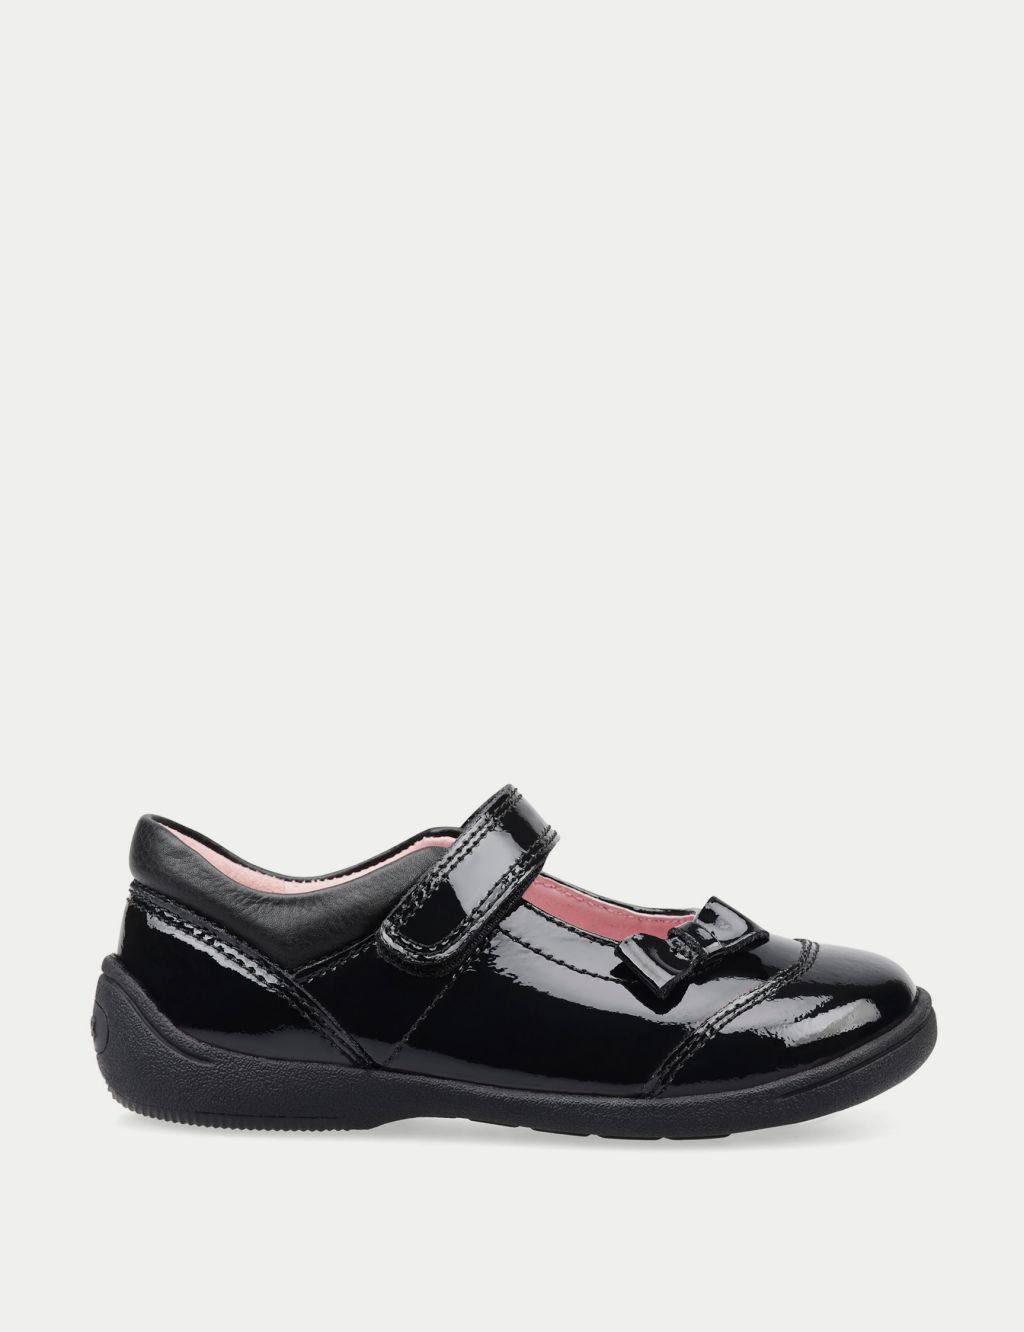 Kids' Patent Leather Schoolwear Shoes (3 Small - 10.5 Small)